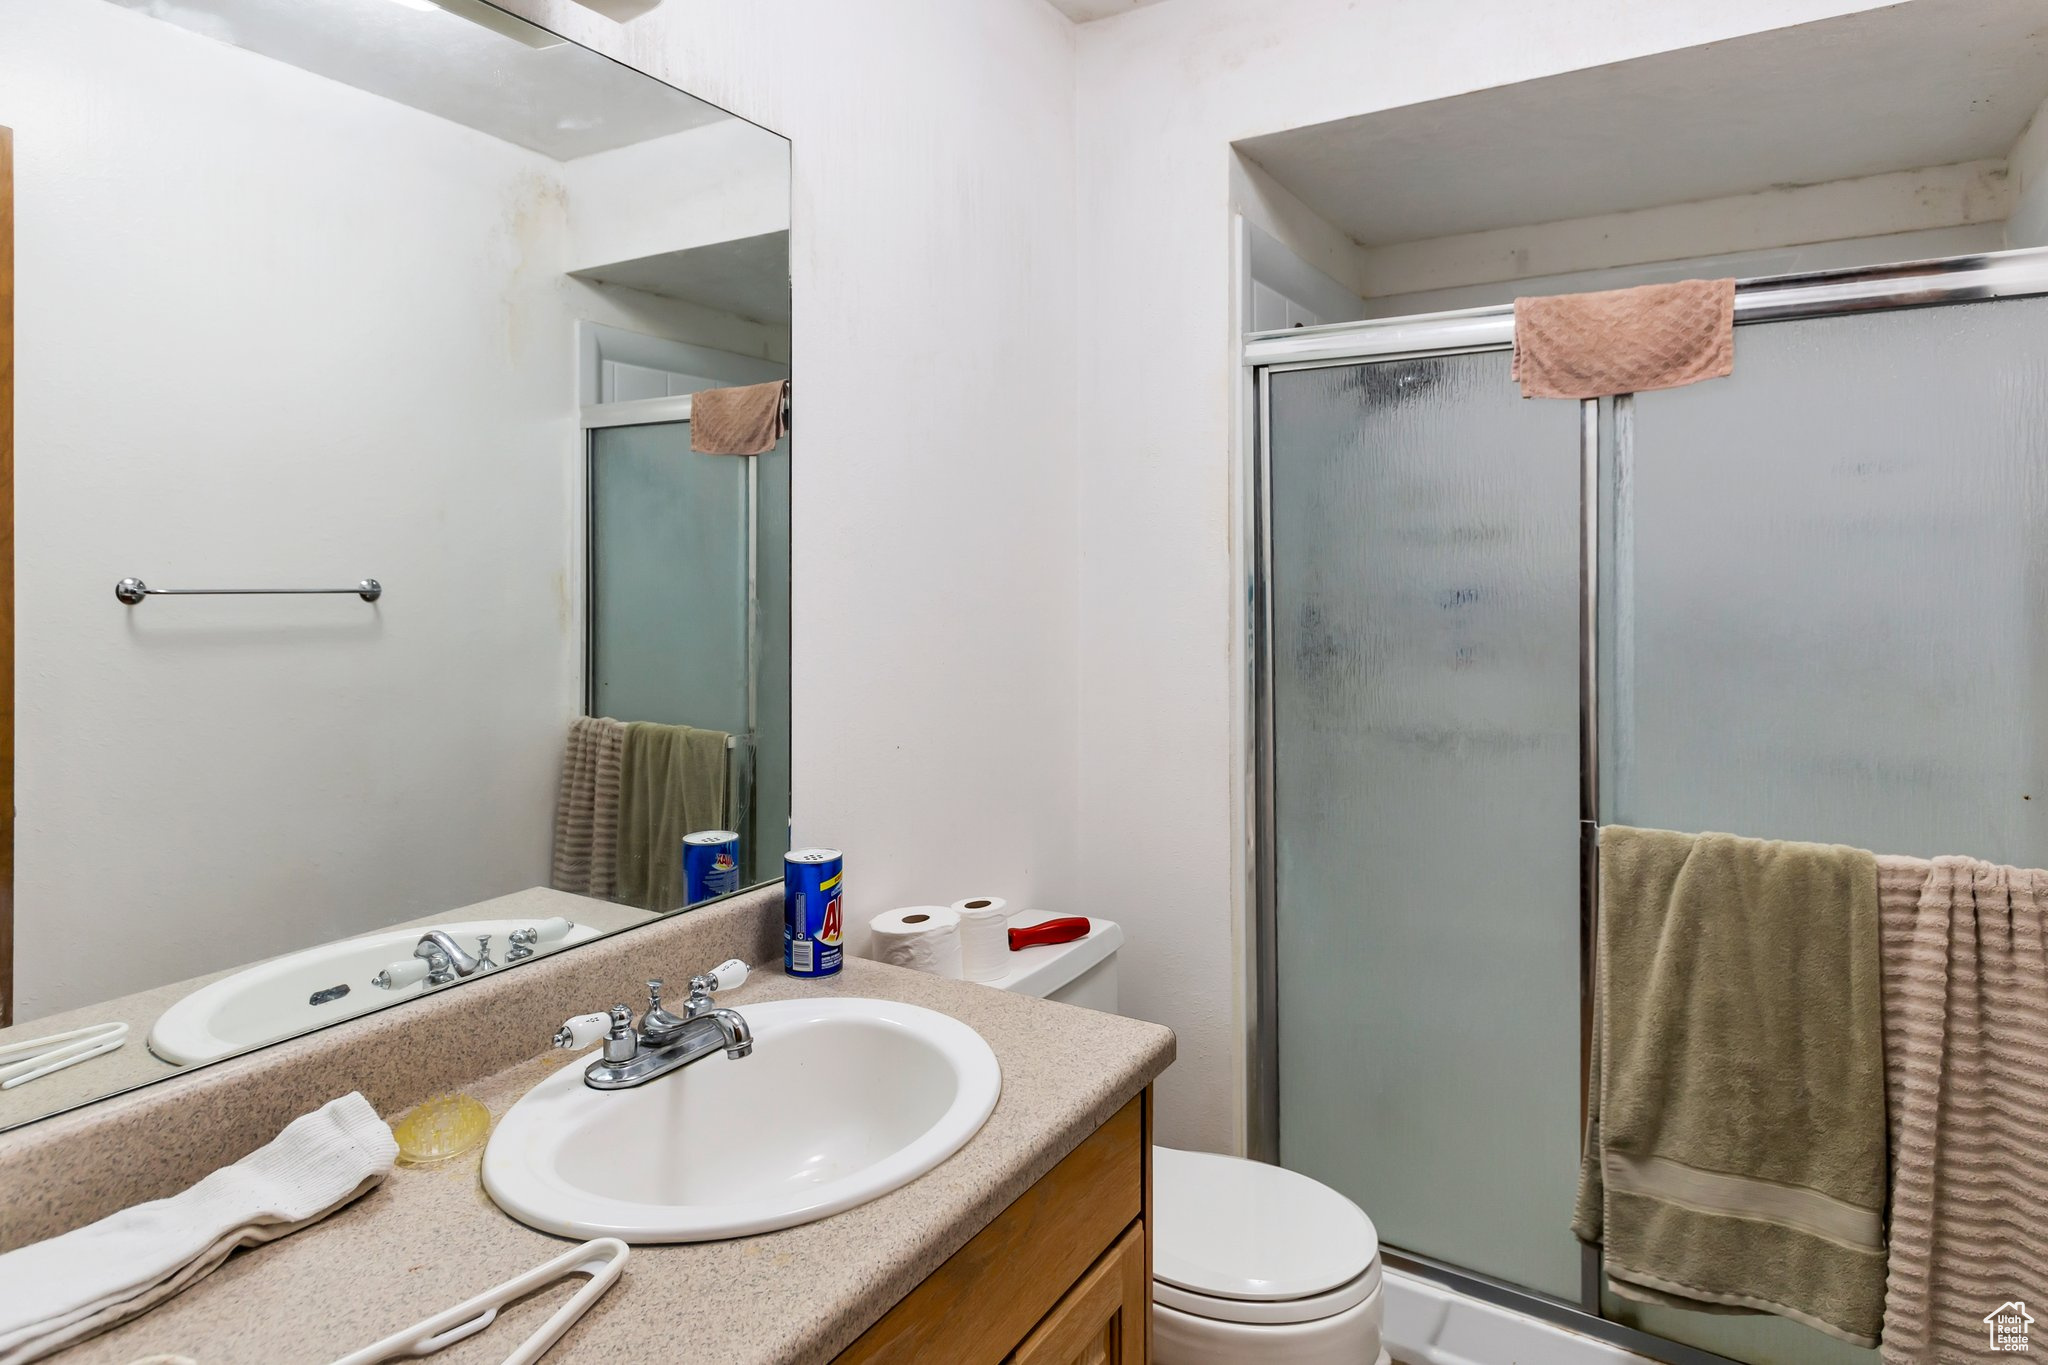 Main Bathroom with oversized vanity, an enclosed shower, and toilet